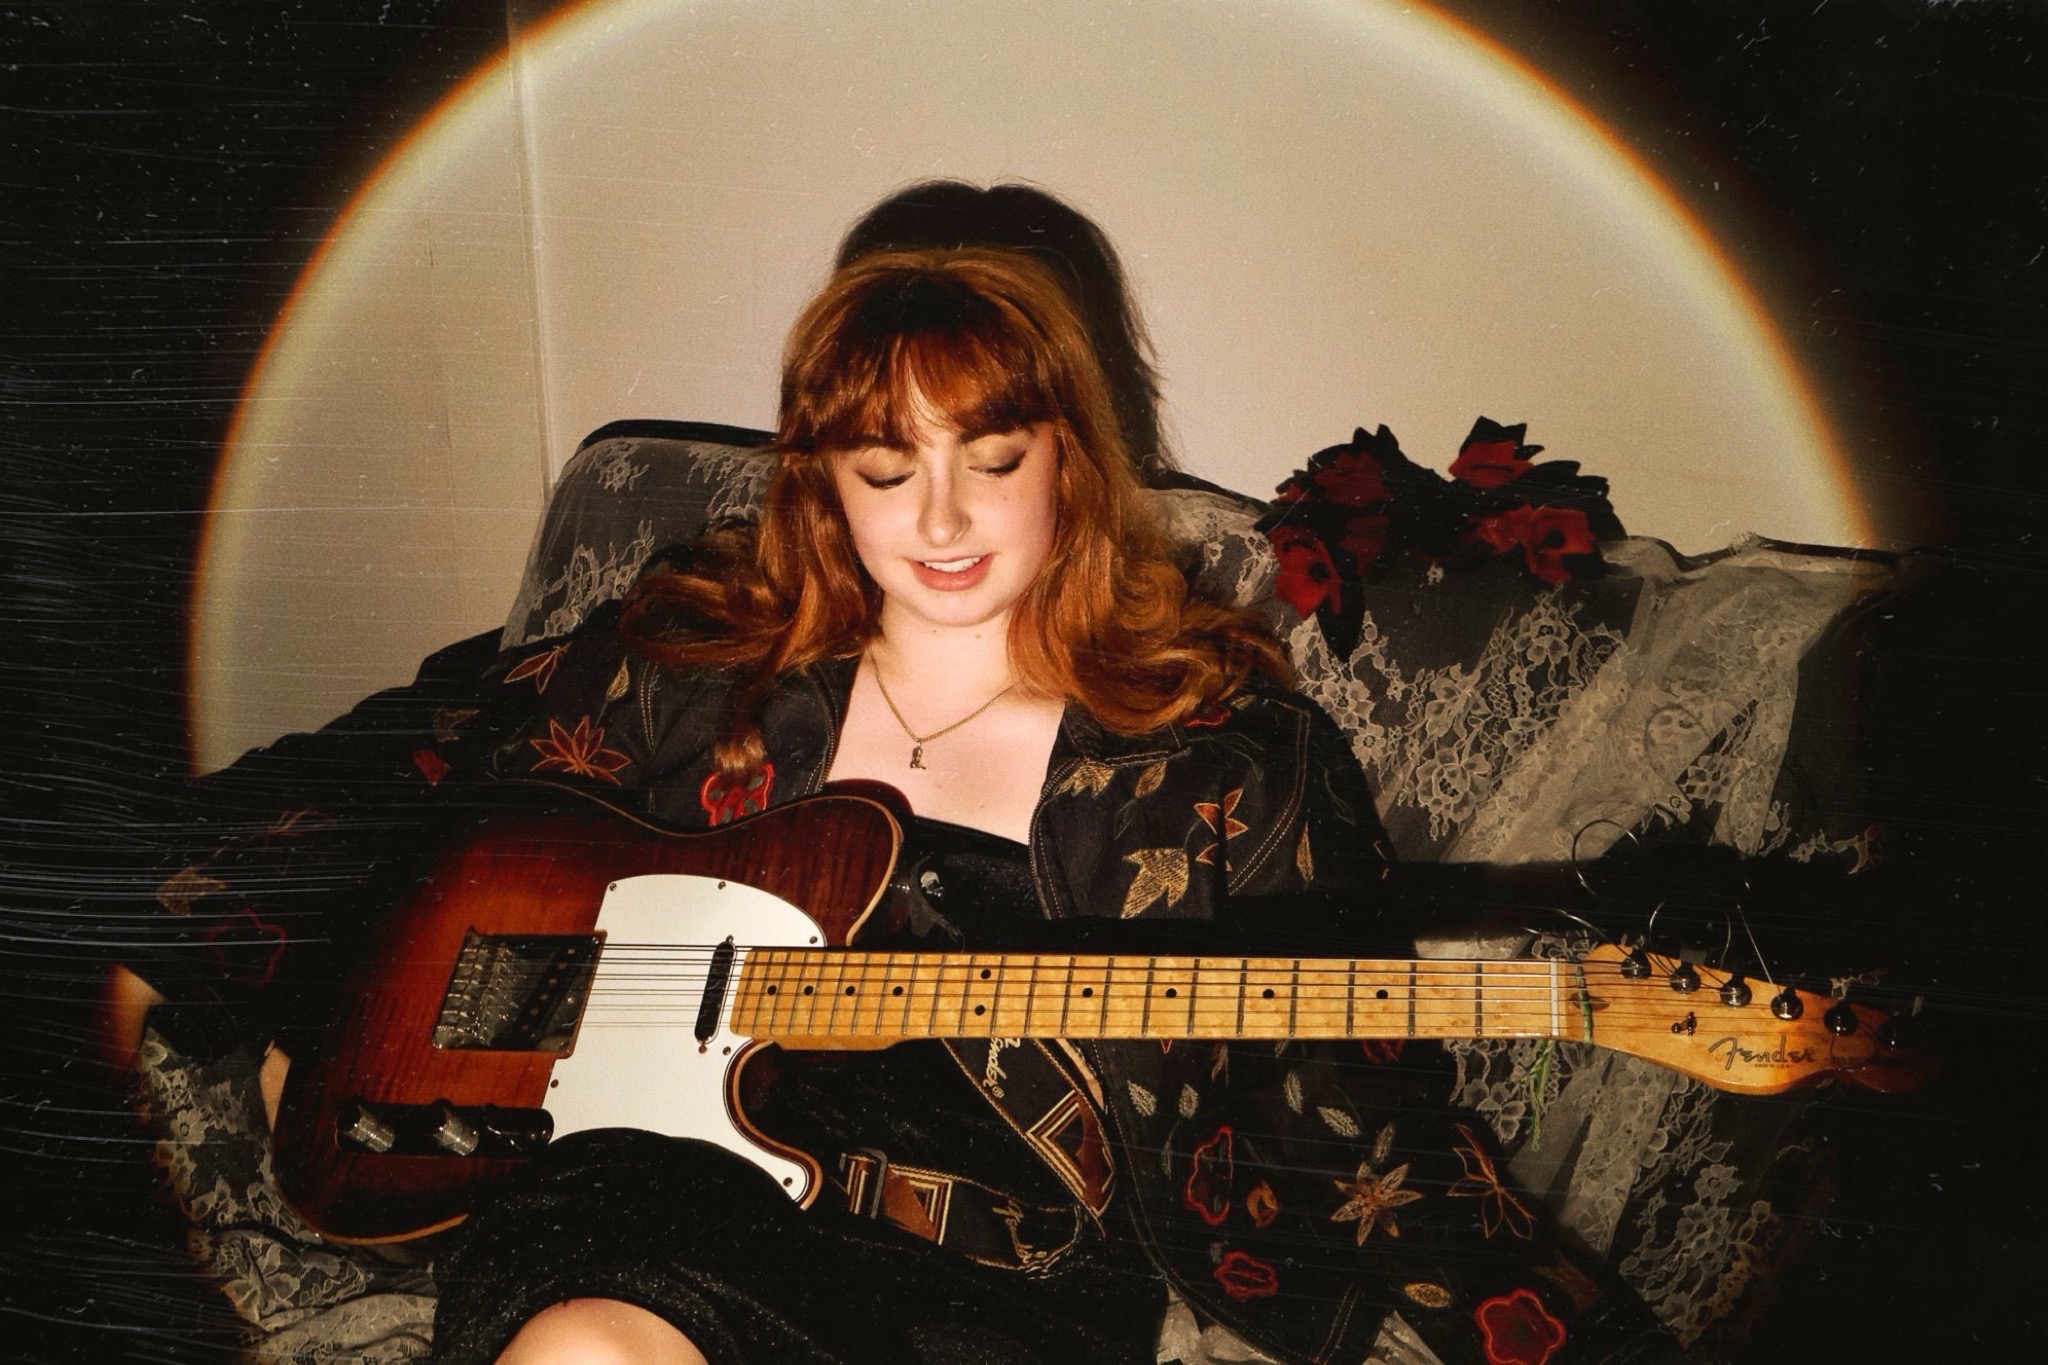 A young white woman with red hair seated on a lace covered couch and holding an electric Fender guitar